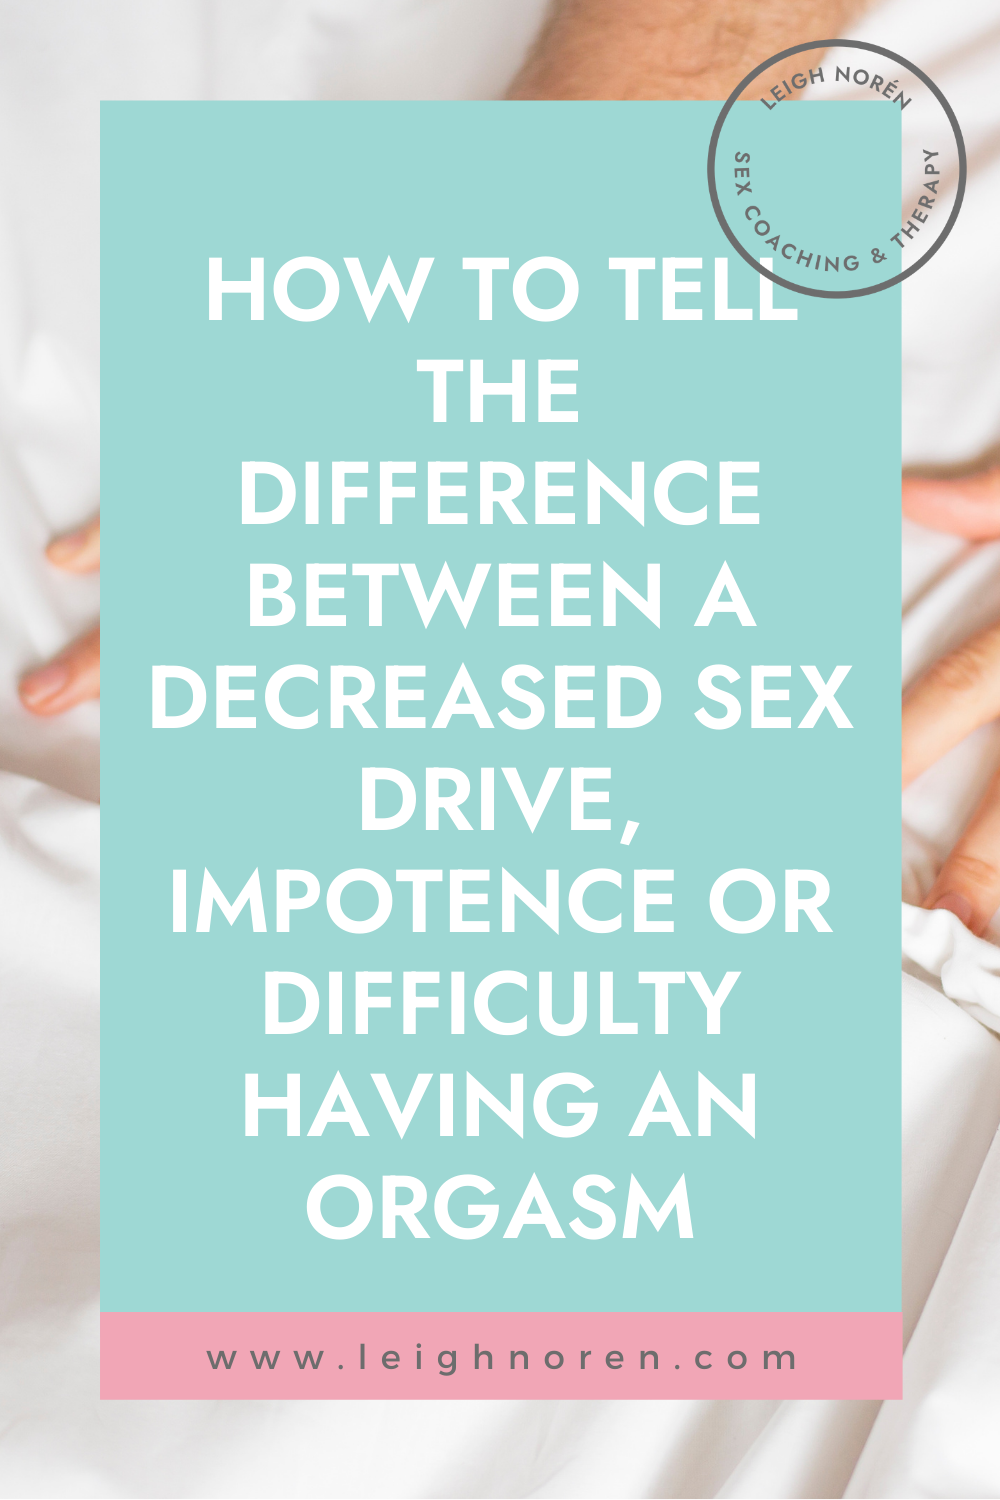 How To Tell The Difference Between A Decreased Sex Drive, Impotence Or Difficulty Having An Orgasm